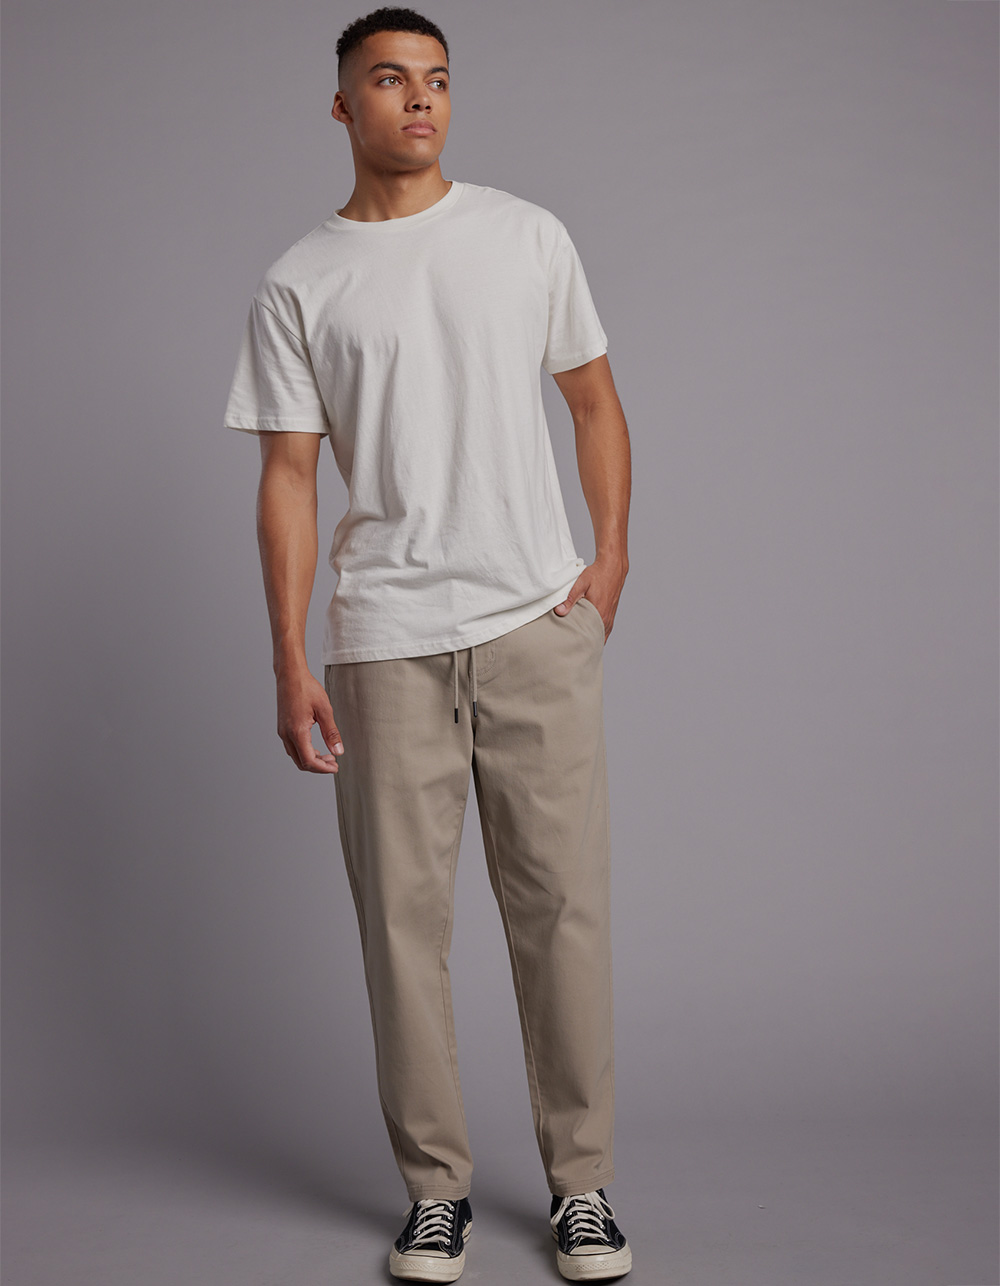 Women's Basswood™ Pull-On Pant